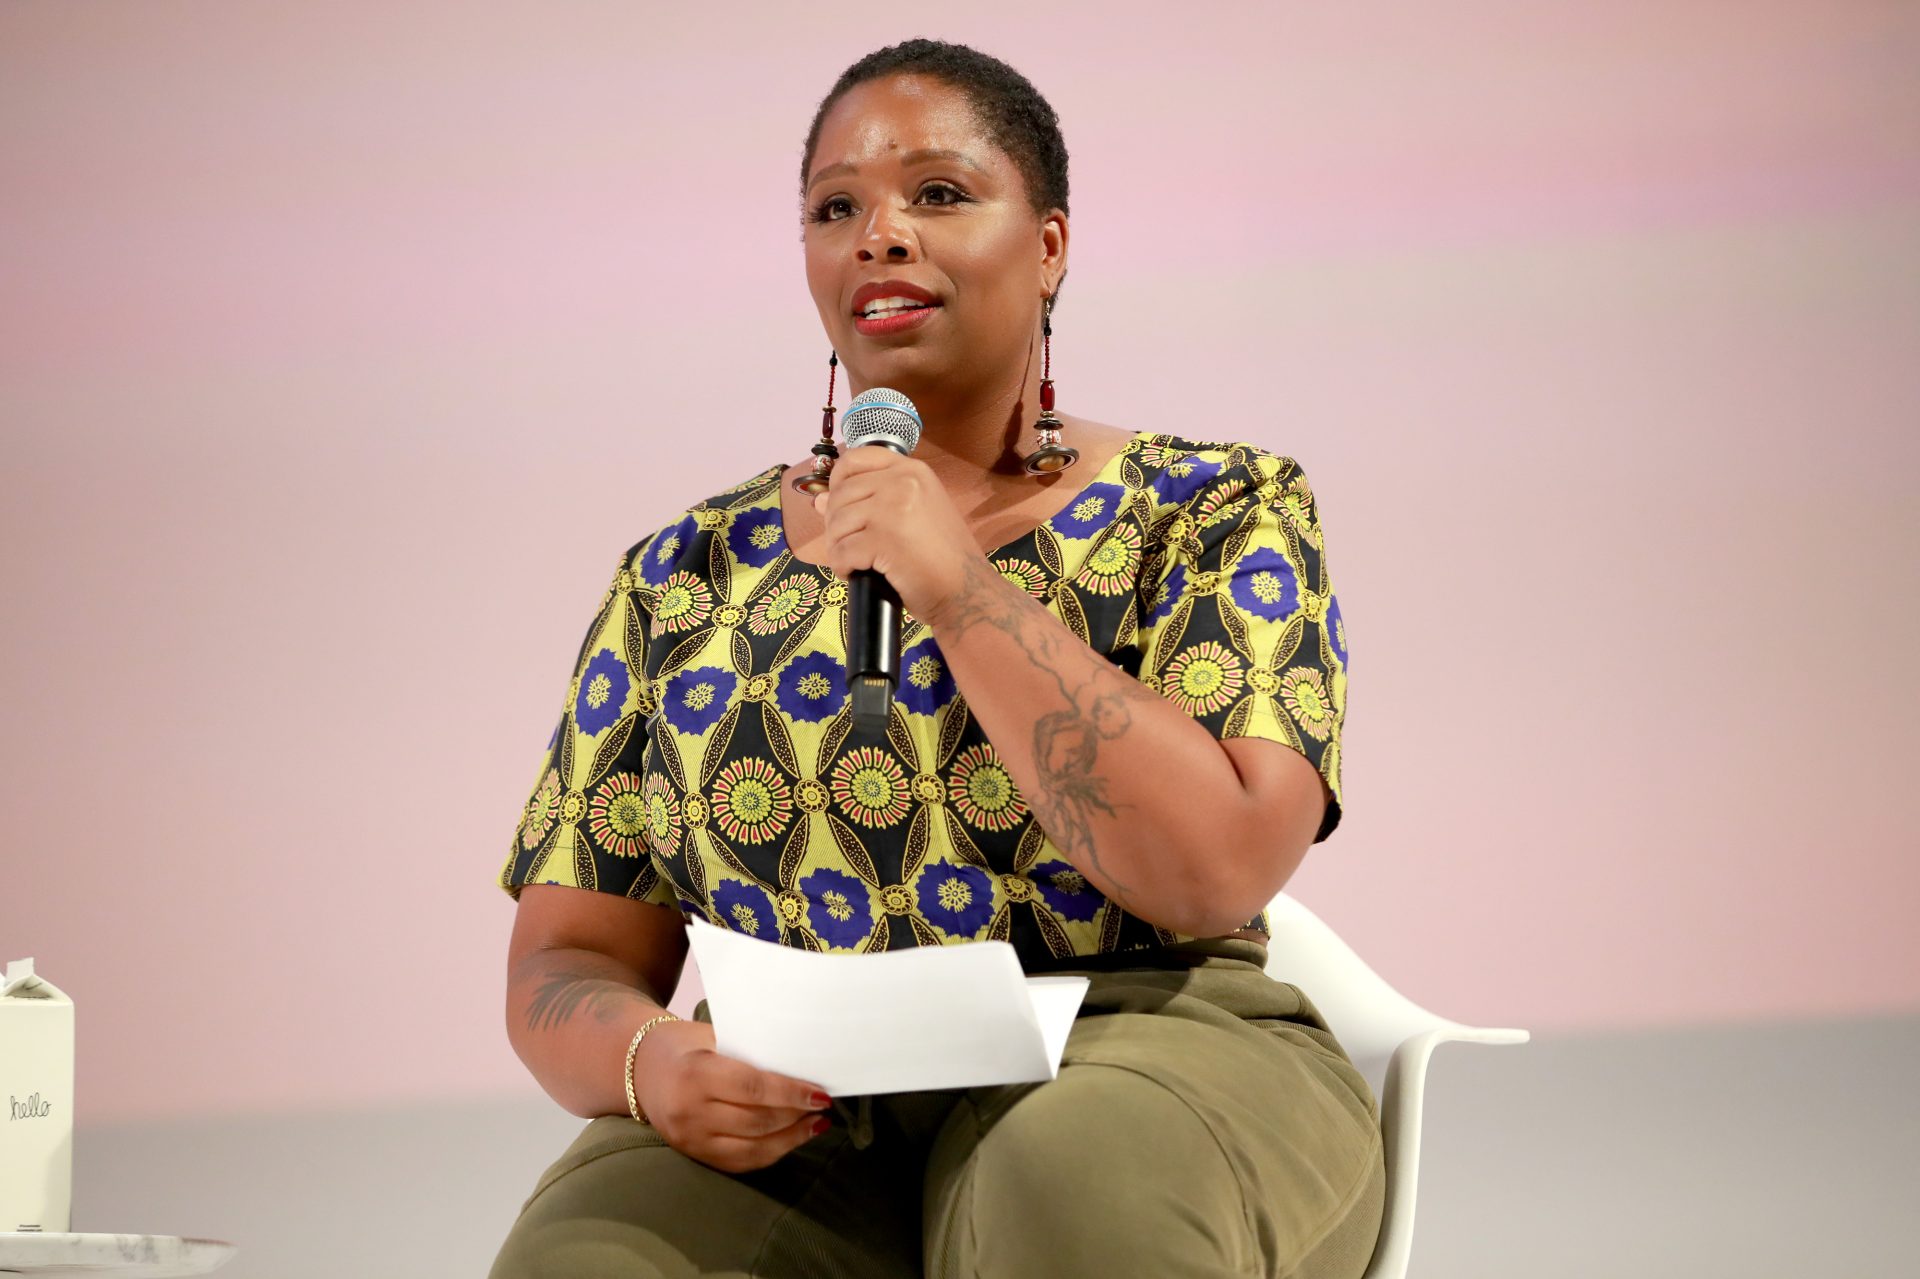 BLM Co-Founder Patrisse Cullors Used Nearly $2 Million In Funds To Pay Brother & Child’s Father For Services